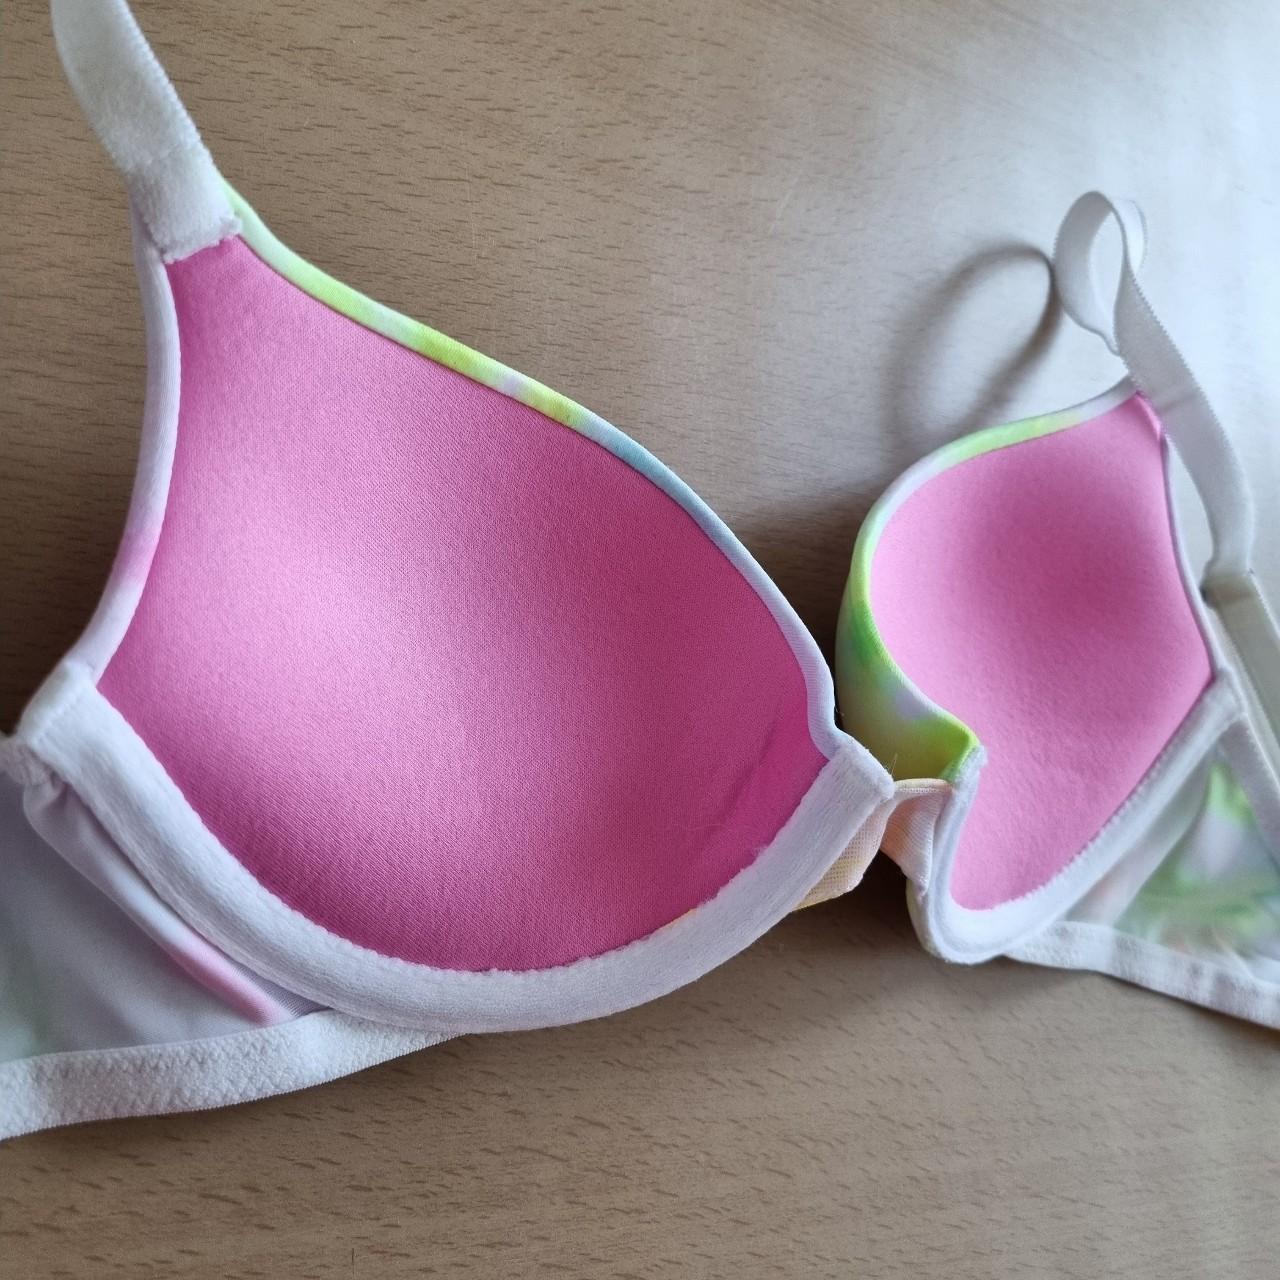 Push-up Bra 32A - PINK by Victoria Secret. Gray Size undefined